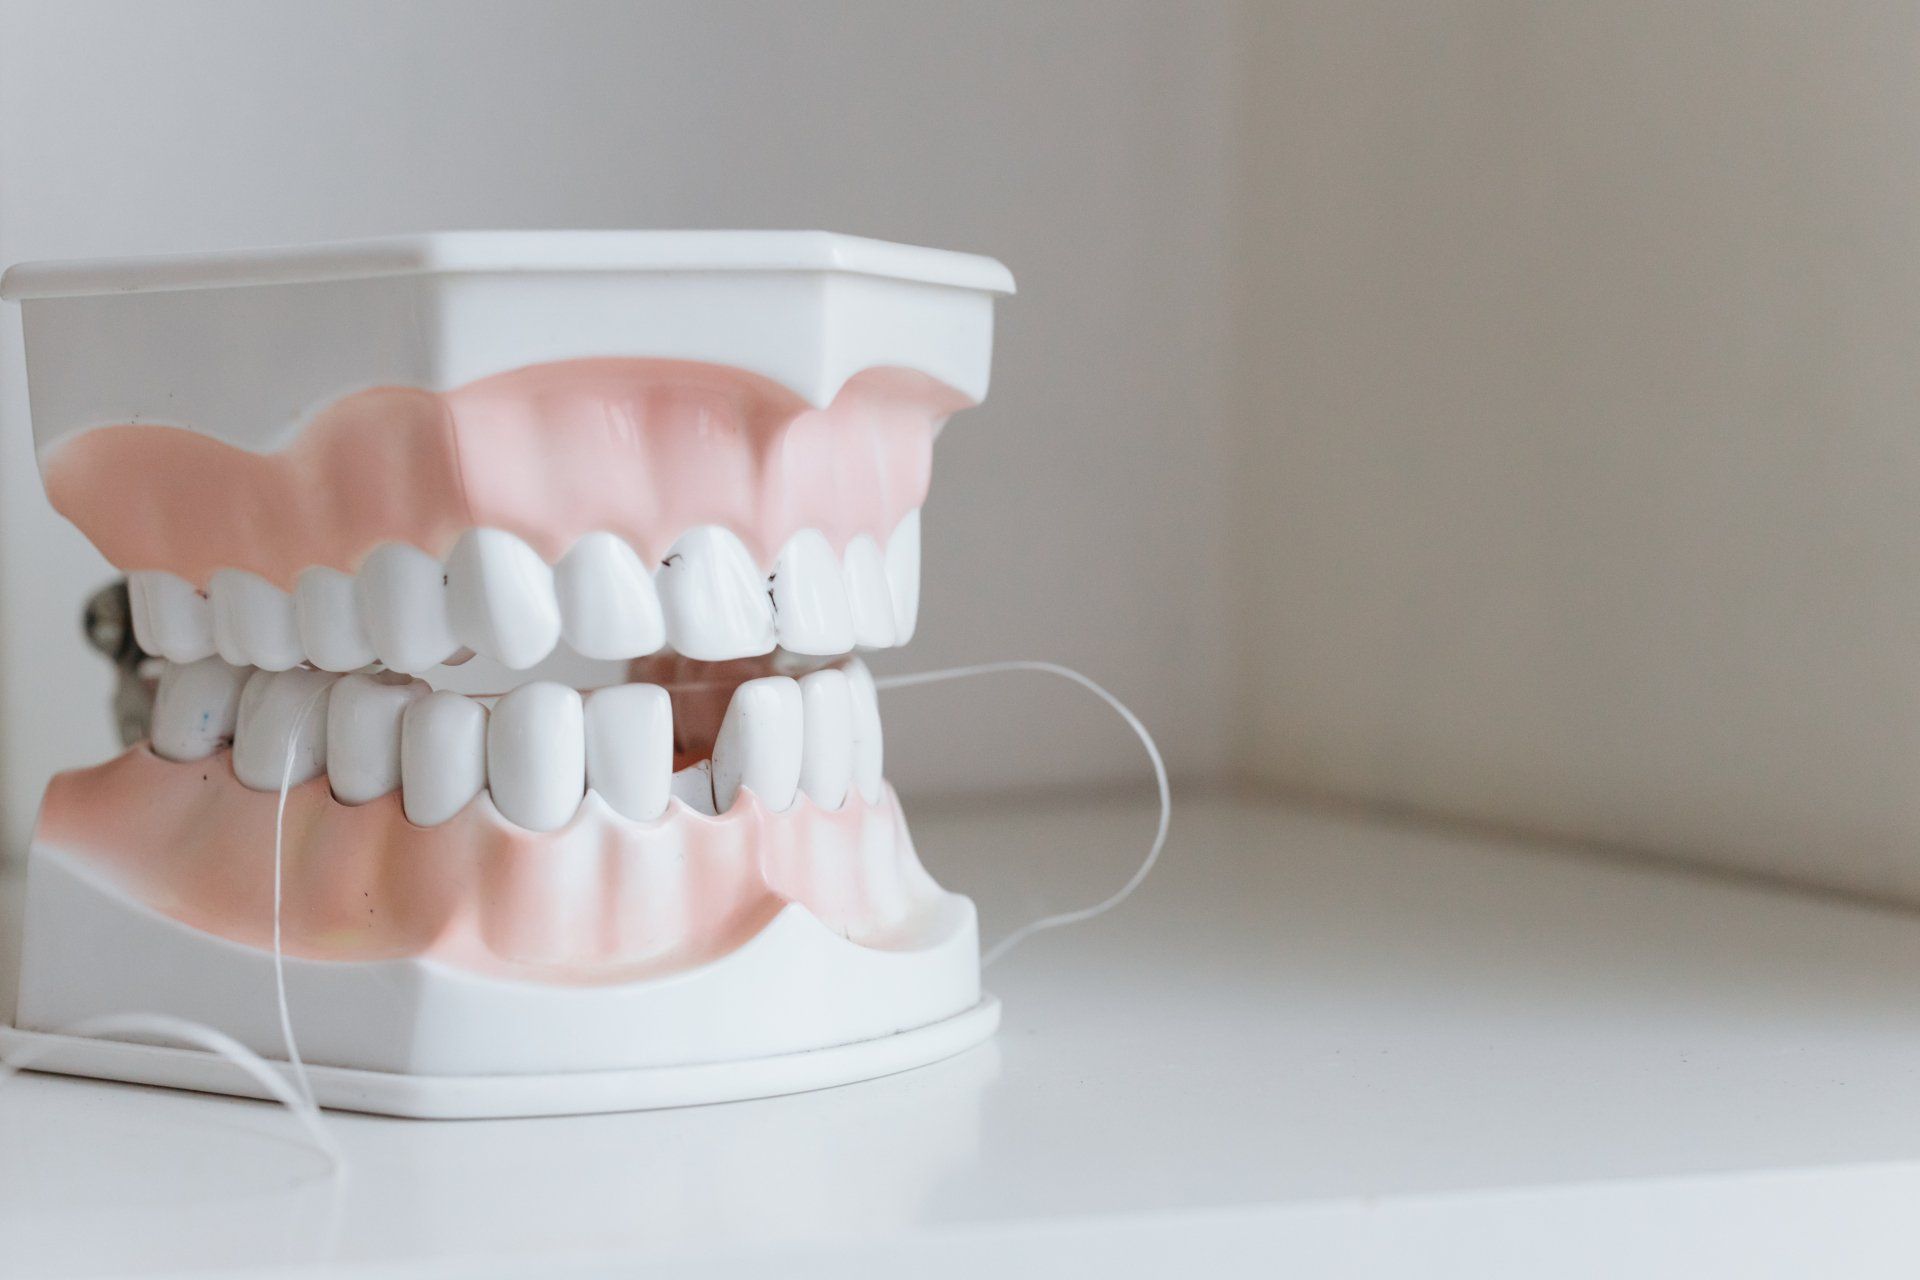 close up dental model of dentures with floss